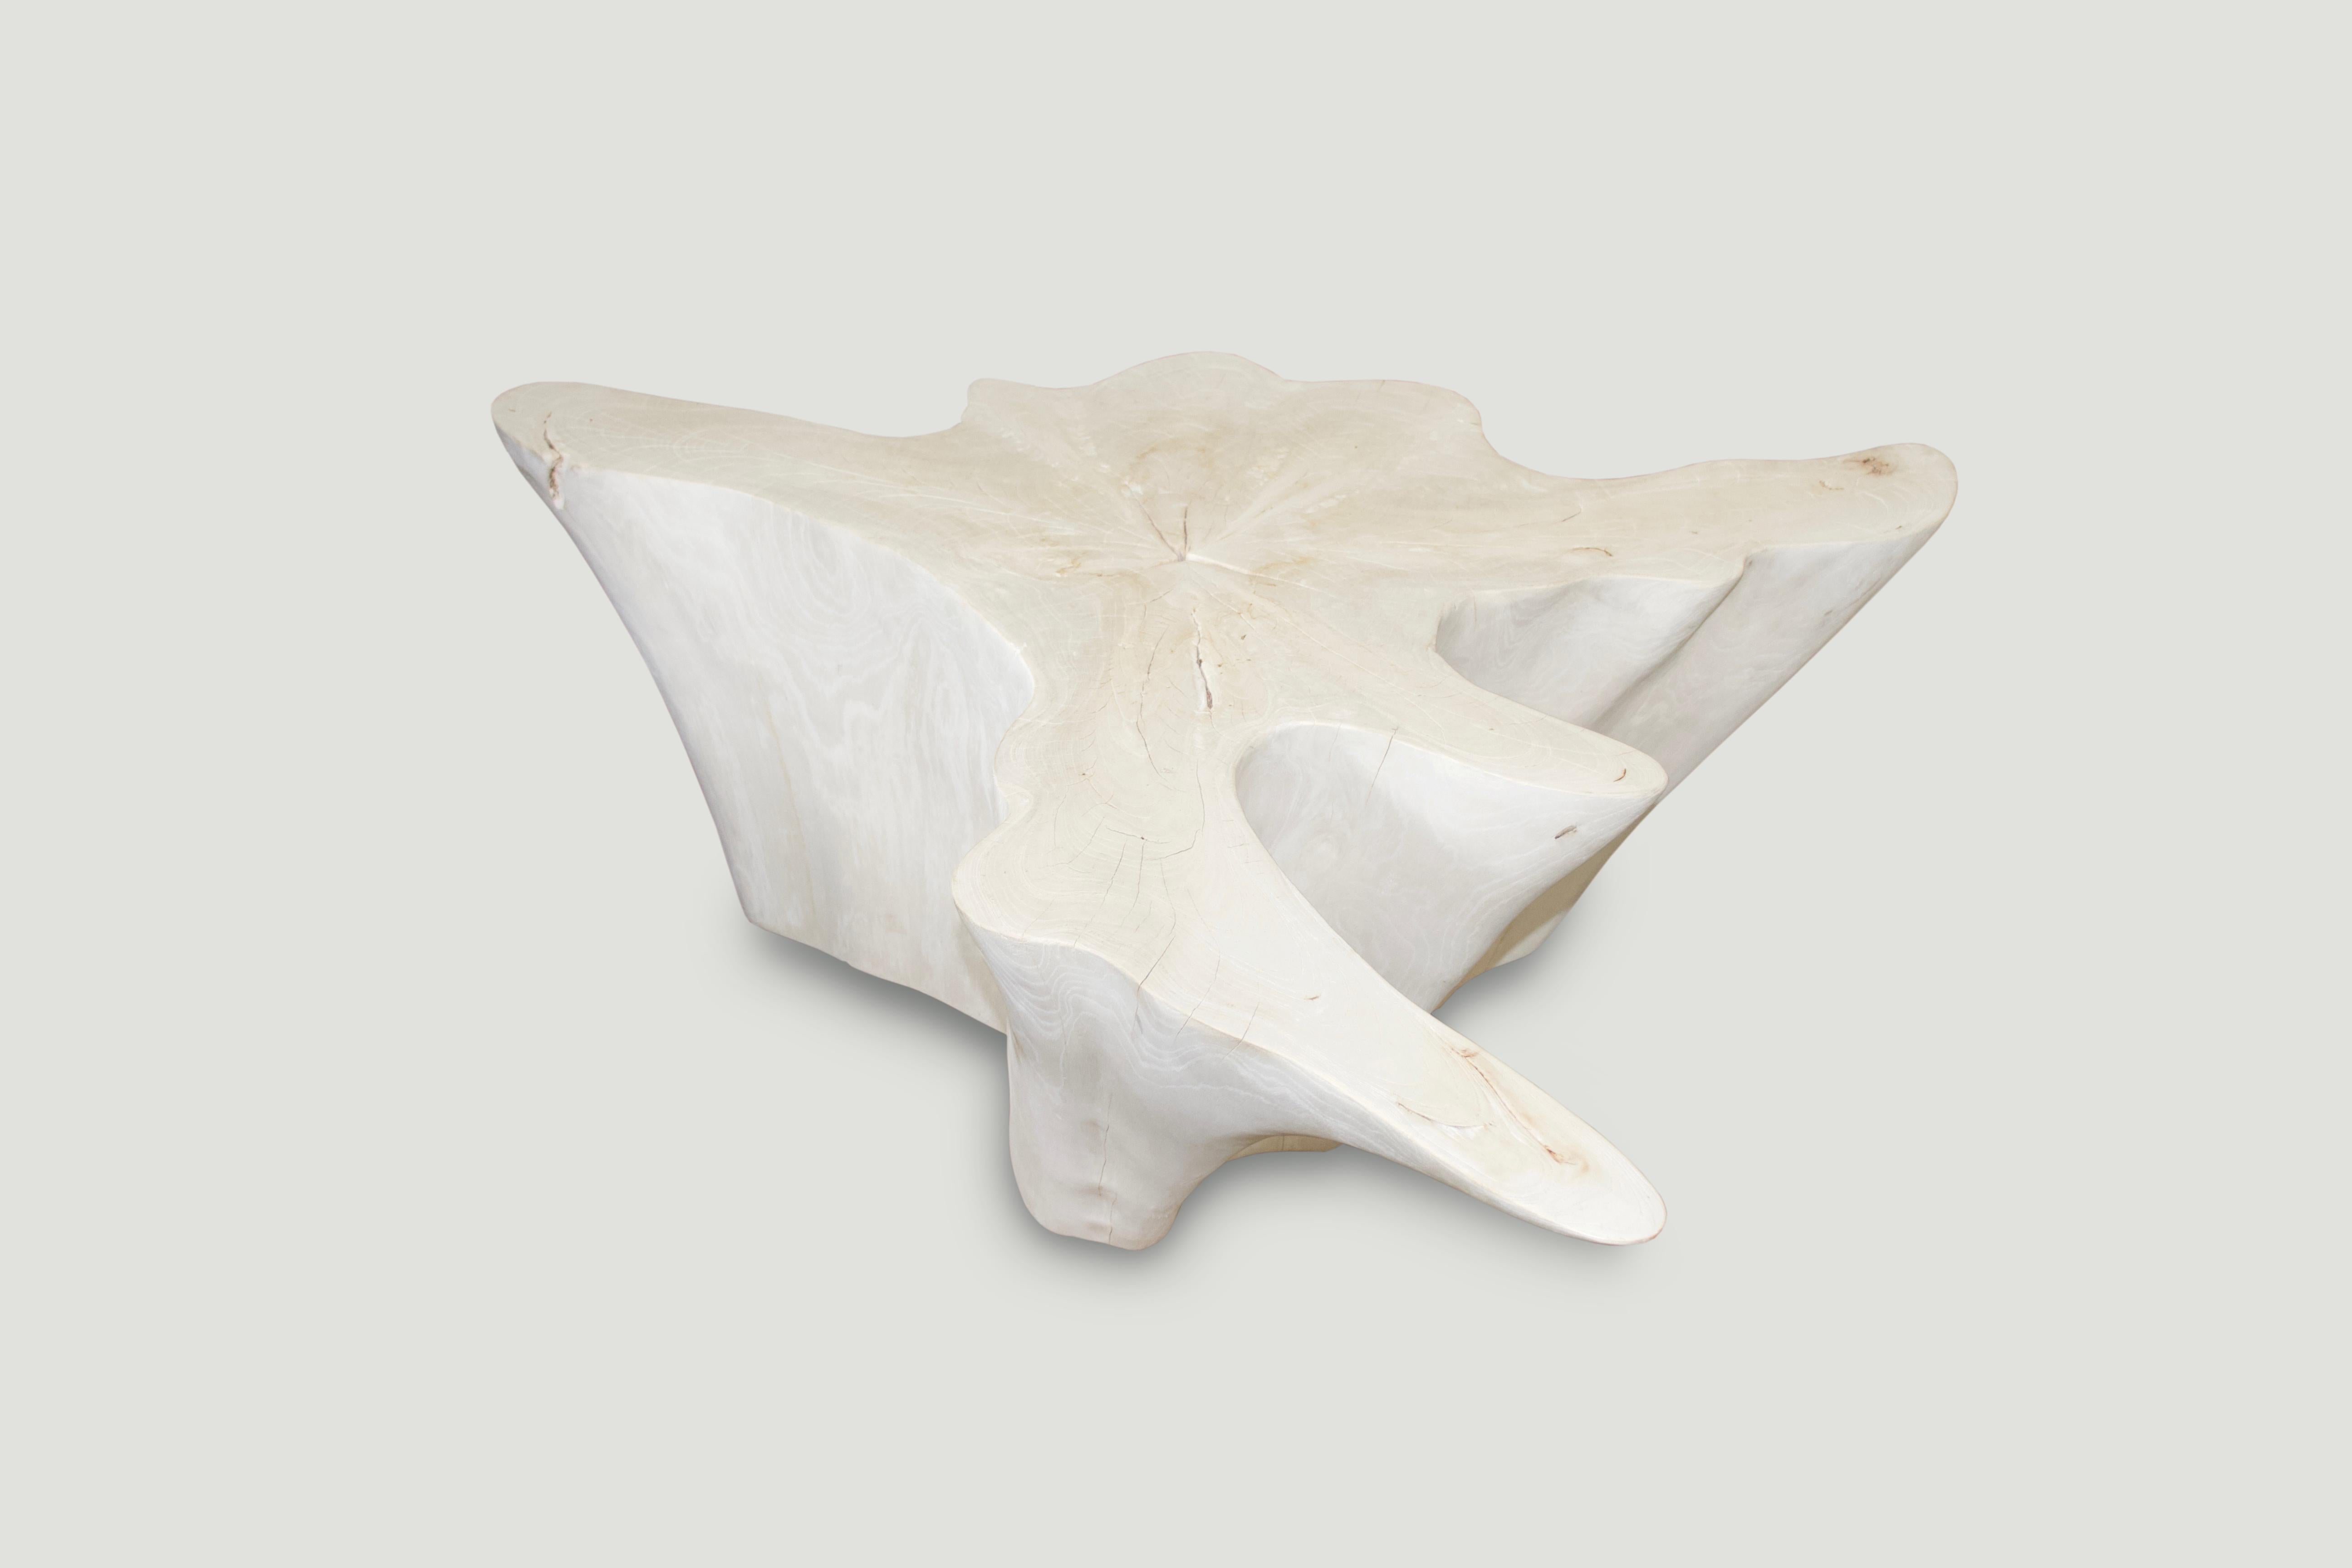 Hand carved reclaimed bleached teak wood amorphous coffee table. A slight graduation from the bottom to the top. Sanded with a smooth finish. Organic is the new modern.

The St. Barts collection features an exciting new line of organic white wash